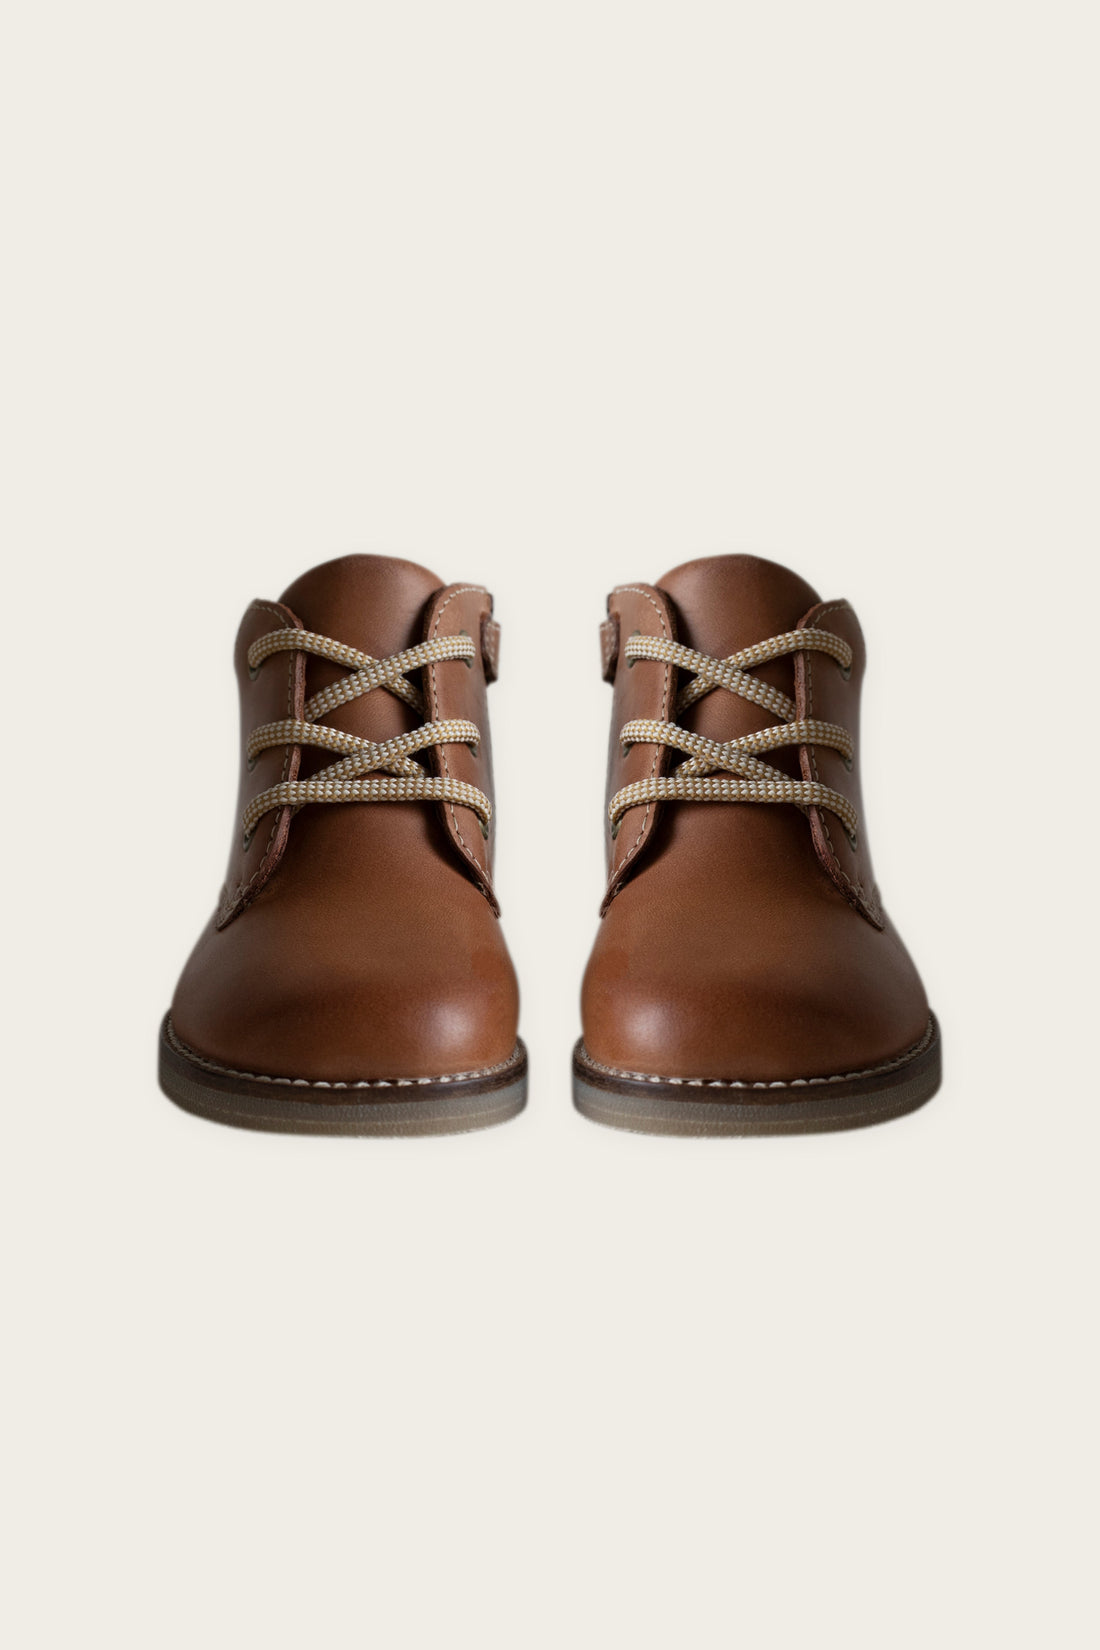 Leather Boot - Tan Childrens Footwear from Jamie Kay USA